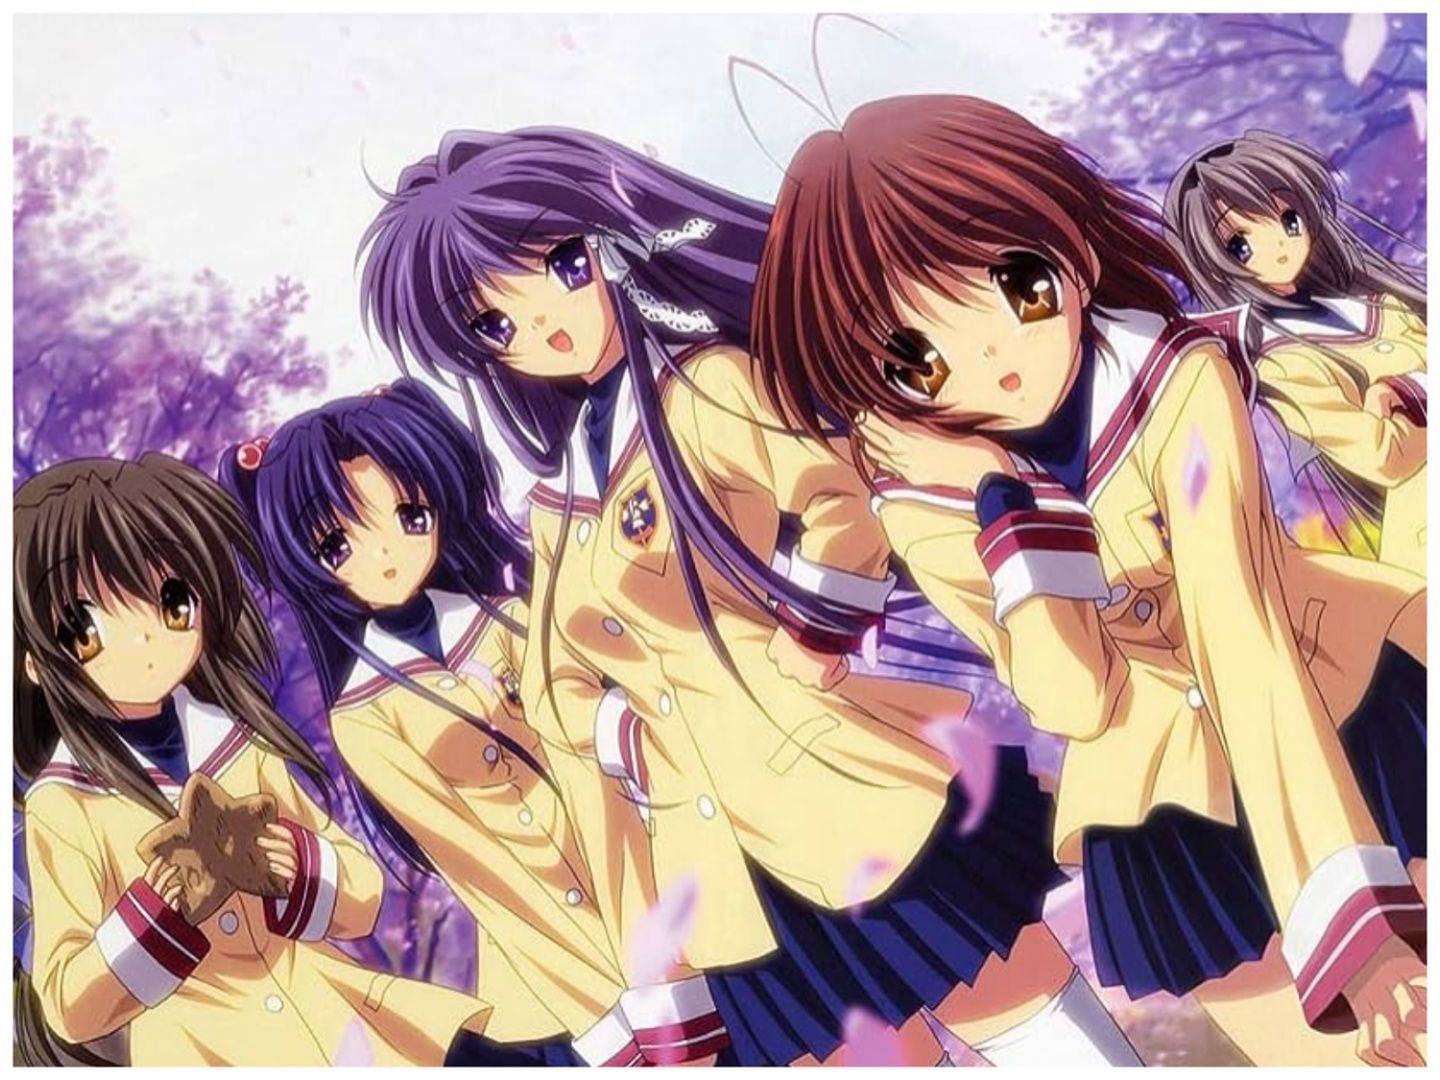 Clannad is an anime that originated from a visual novel by KEY for Windows PCs in 2004 (Image via Kyoto Animation)